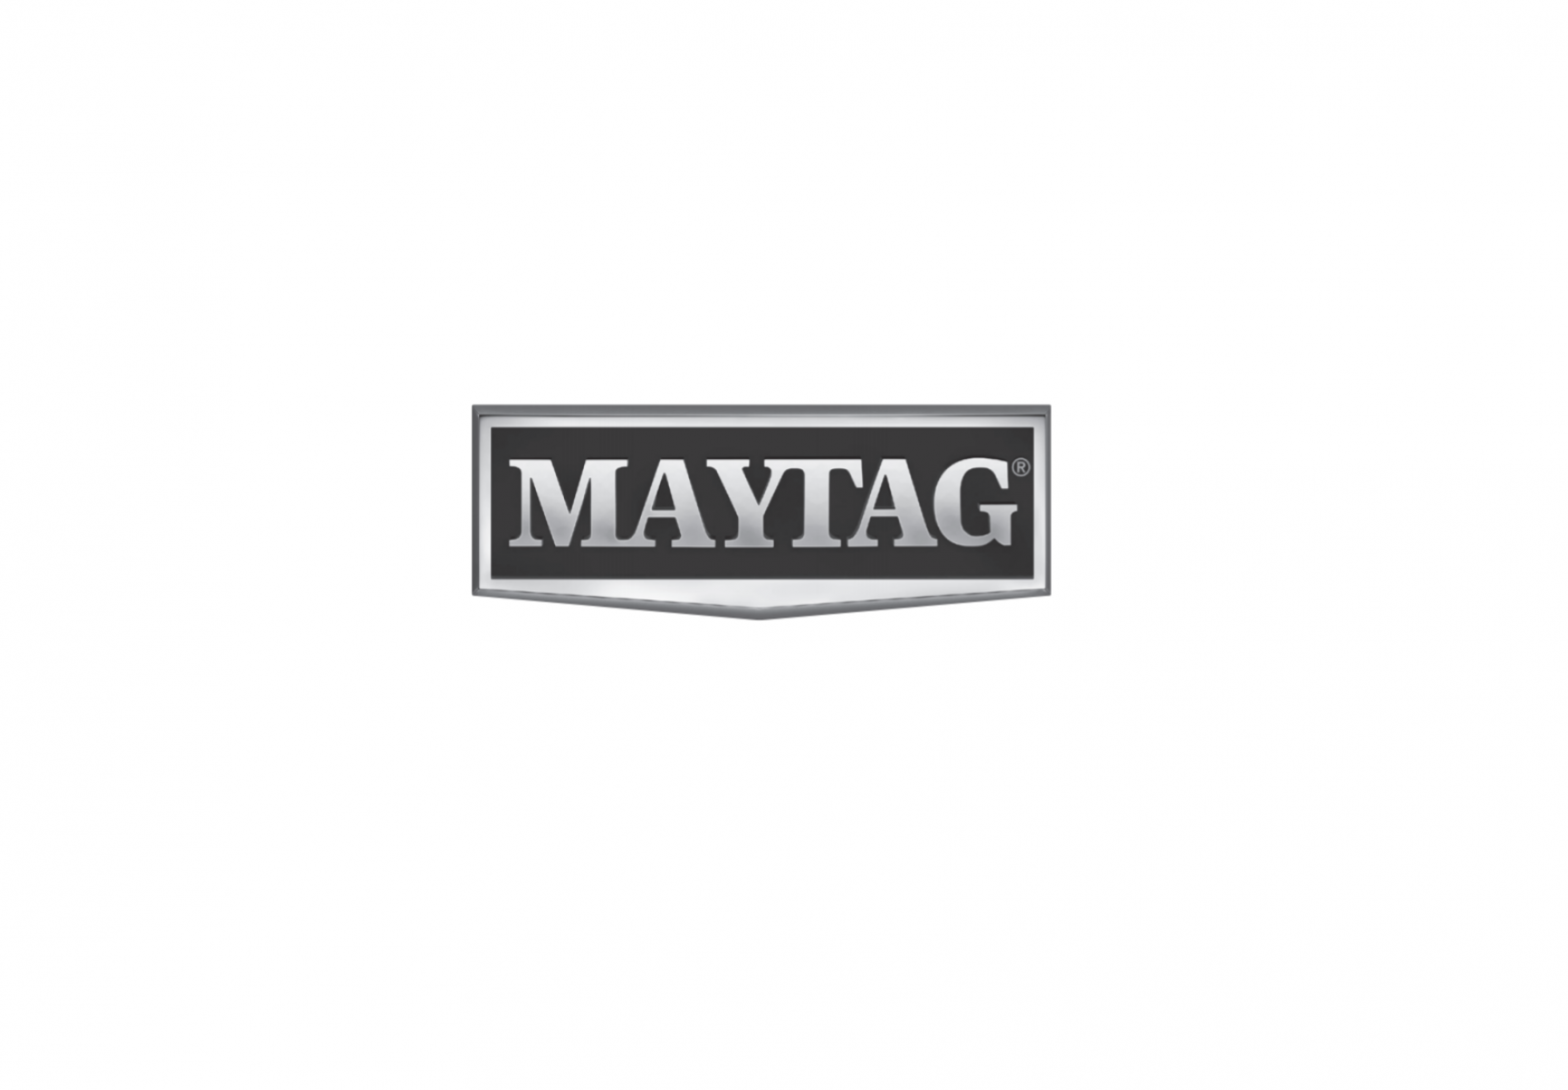 MAYTAG Freestanding Electric Range User Guide